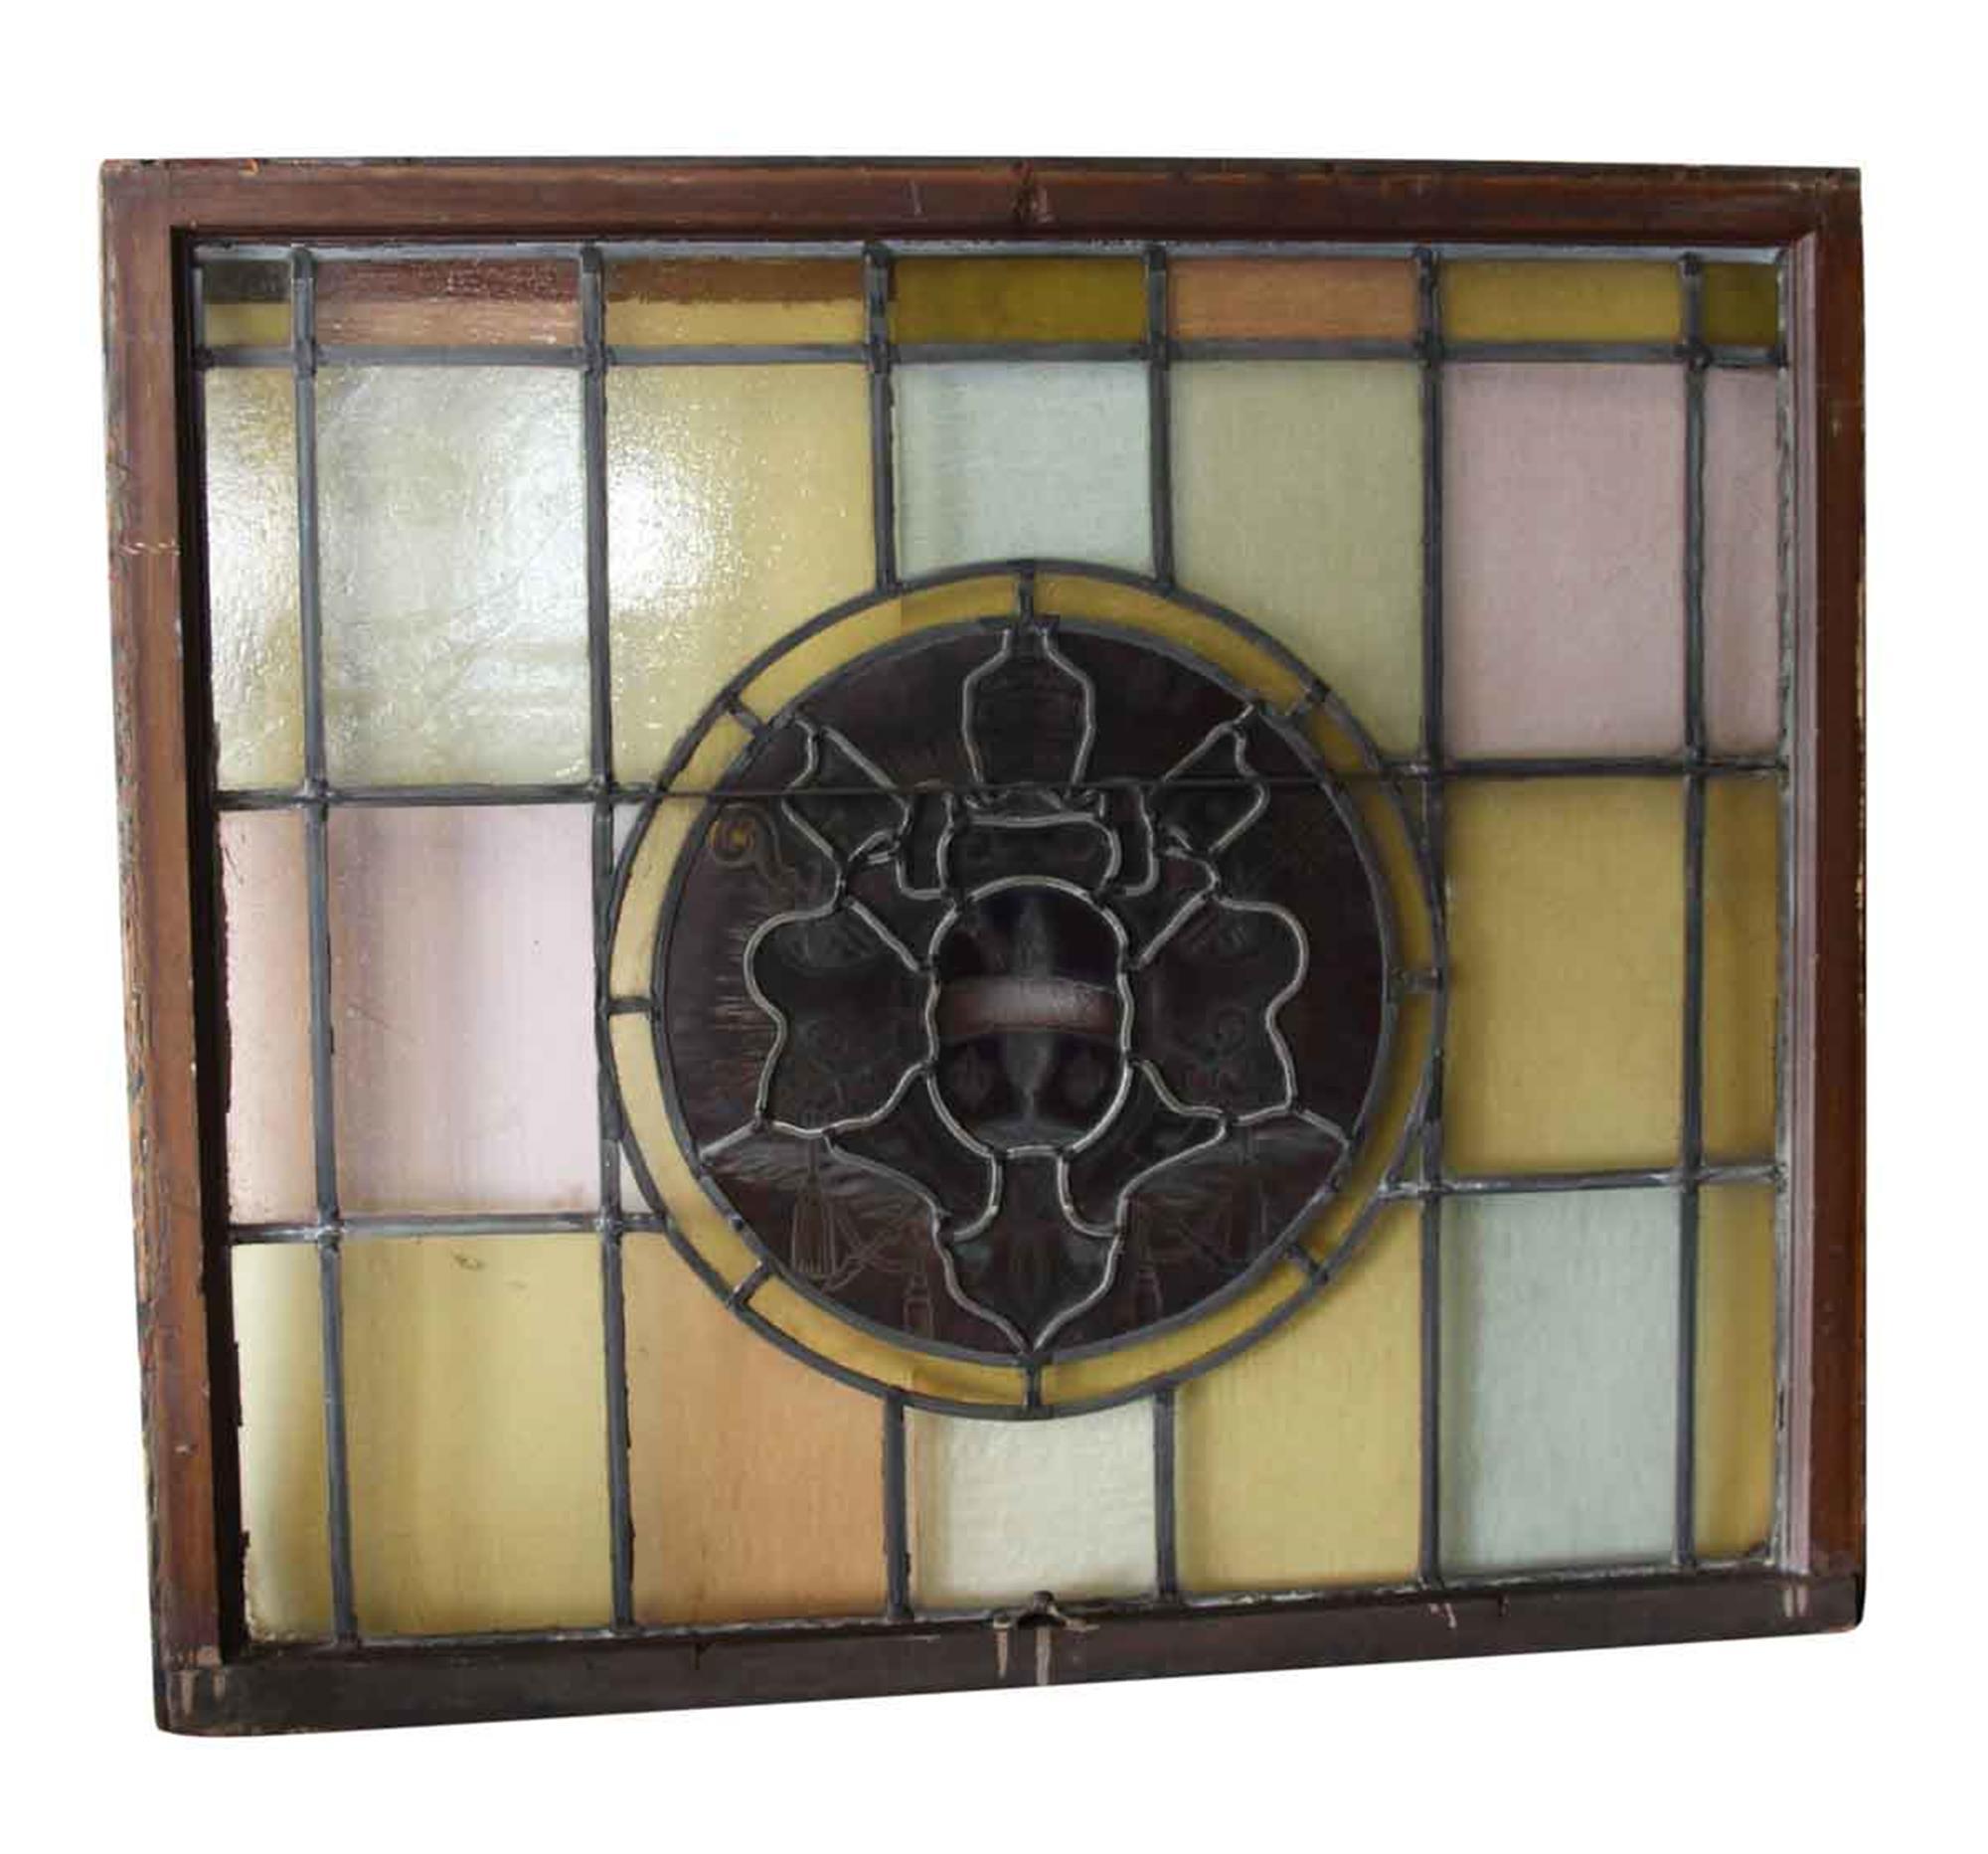 American 1910 Arts & Crafts Stained Leaded Glass Window with Ecclesiastical Motif